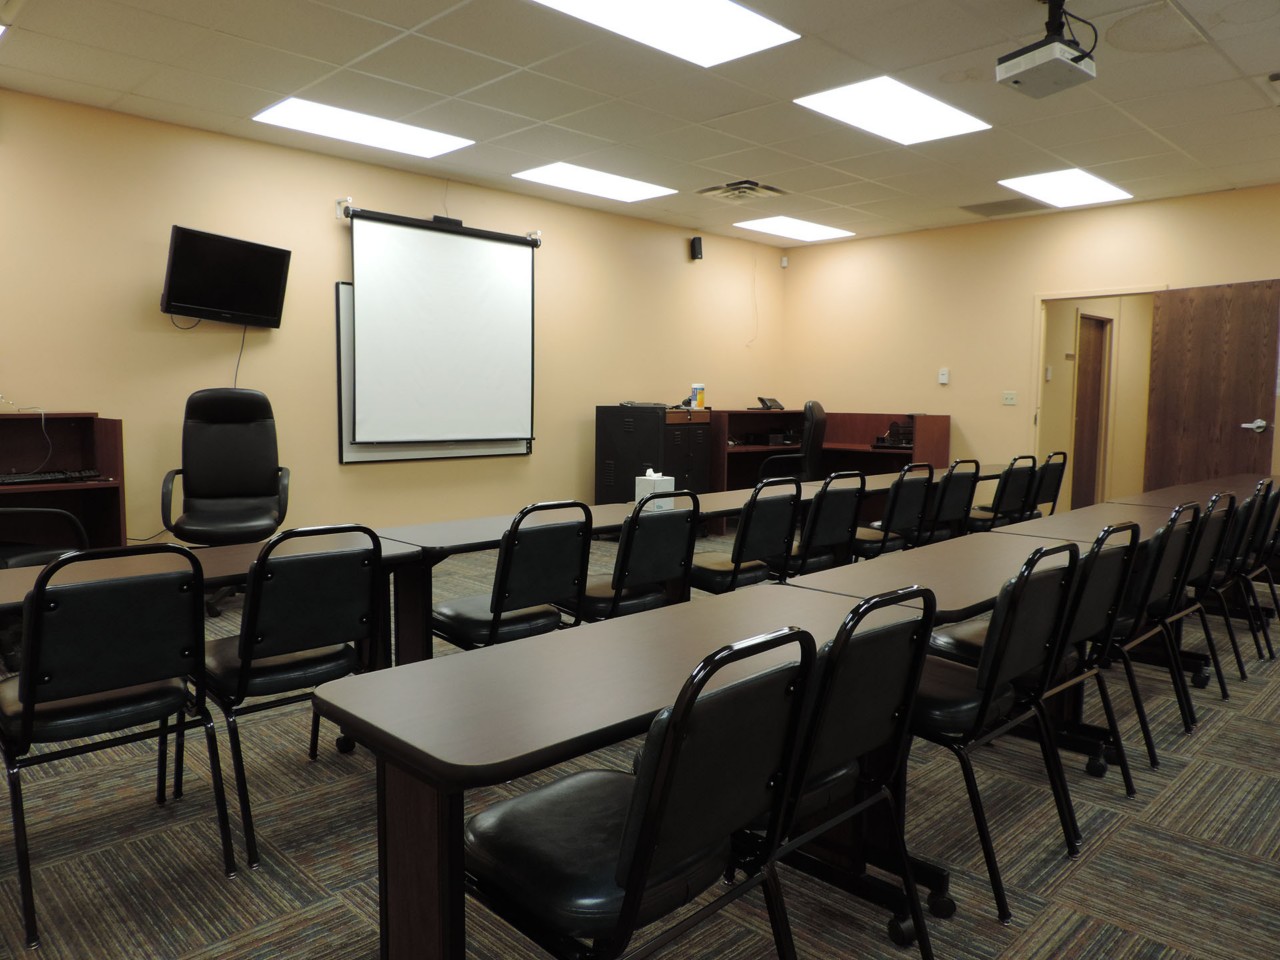 Conference or training room with available projector, white board, and tables/chairs.